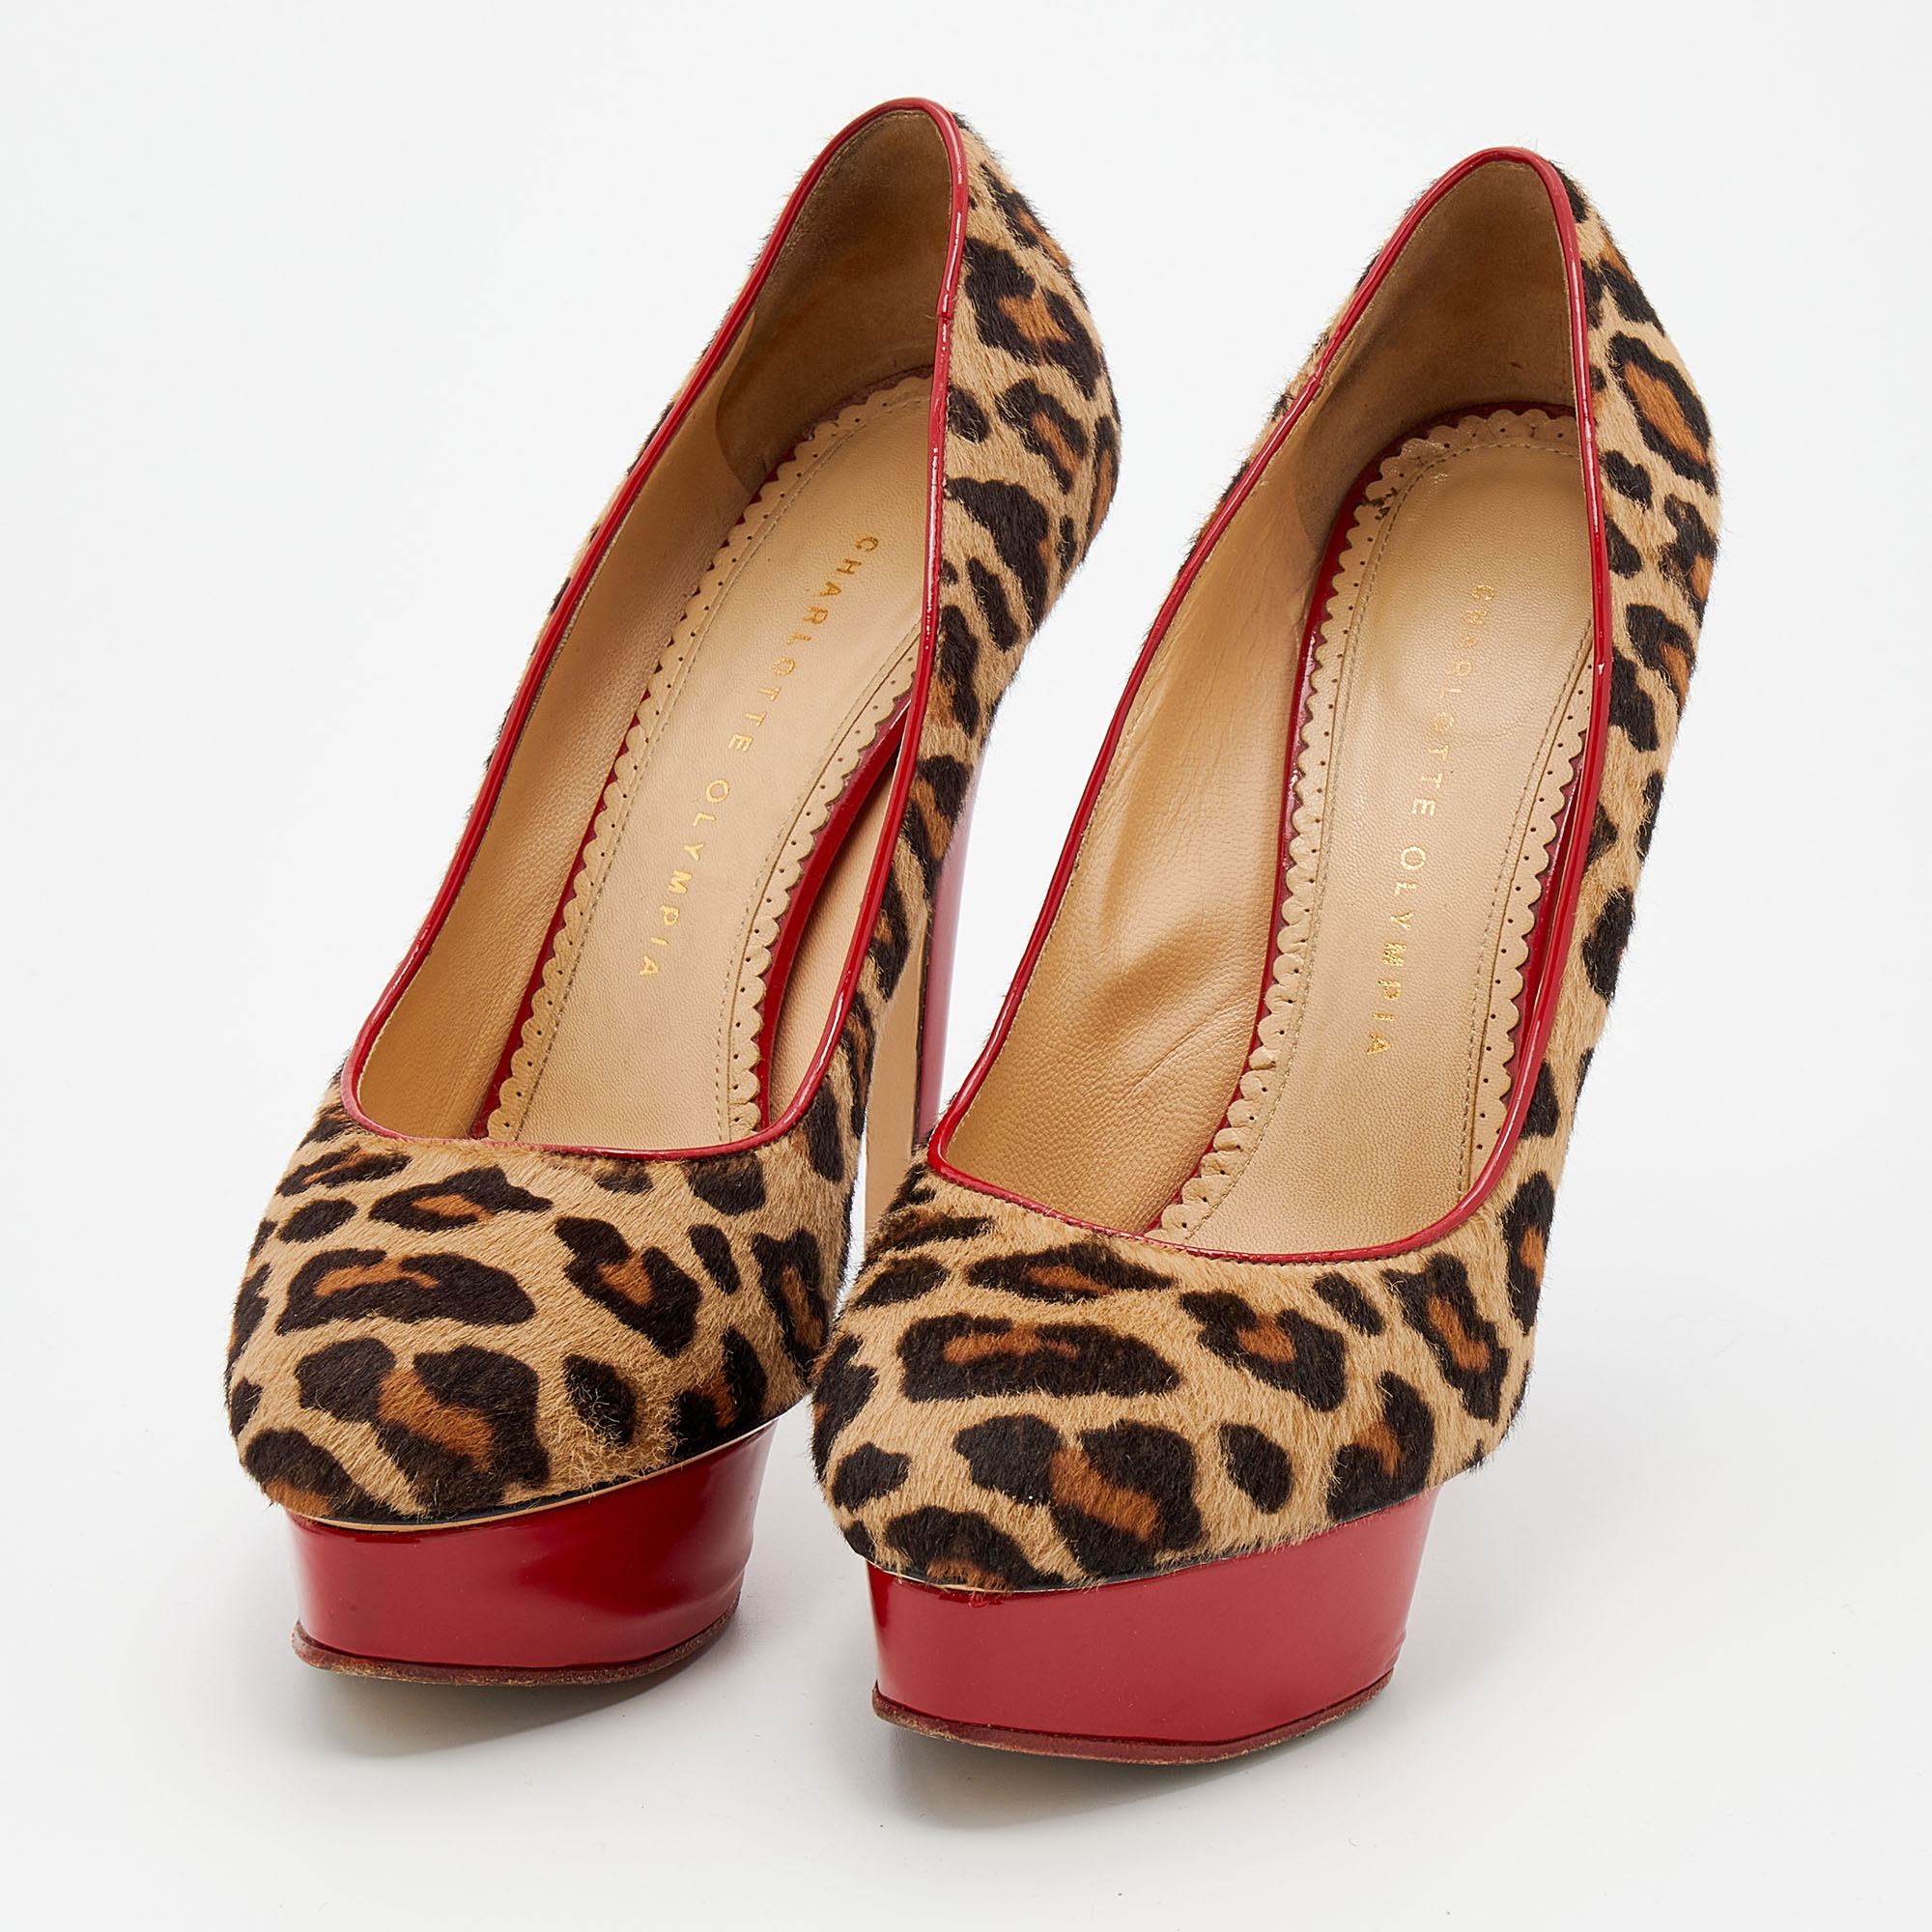 

Charlotte Olympia Brown Leopard Print Calf Hair Polly Platform Pumps Size